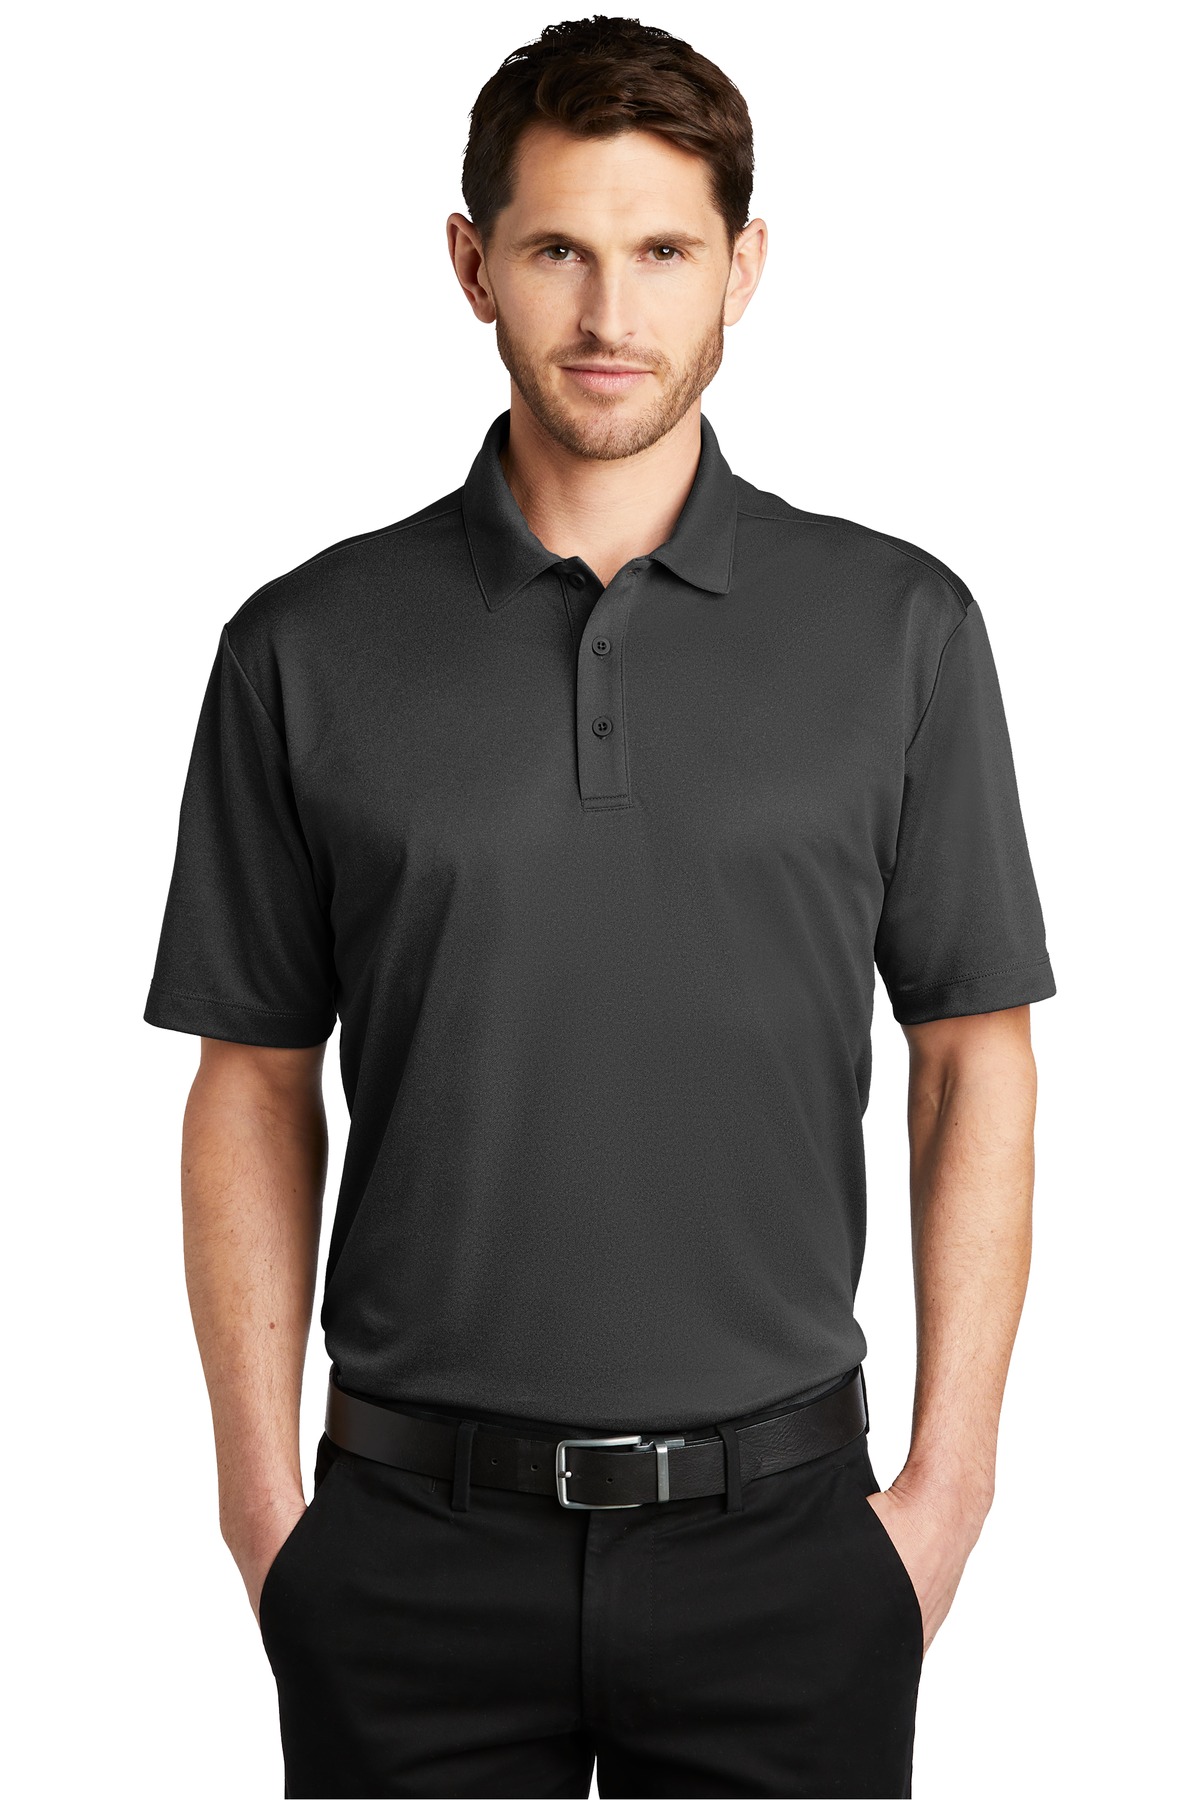 Port Authority  Heathered Silk Touch  Performance Polo. K542